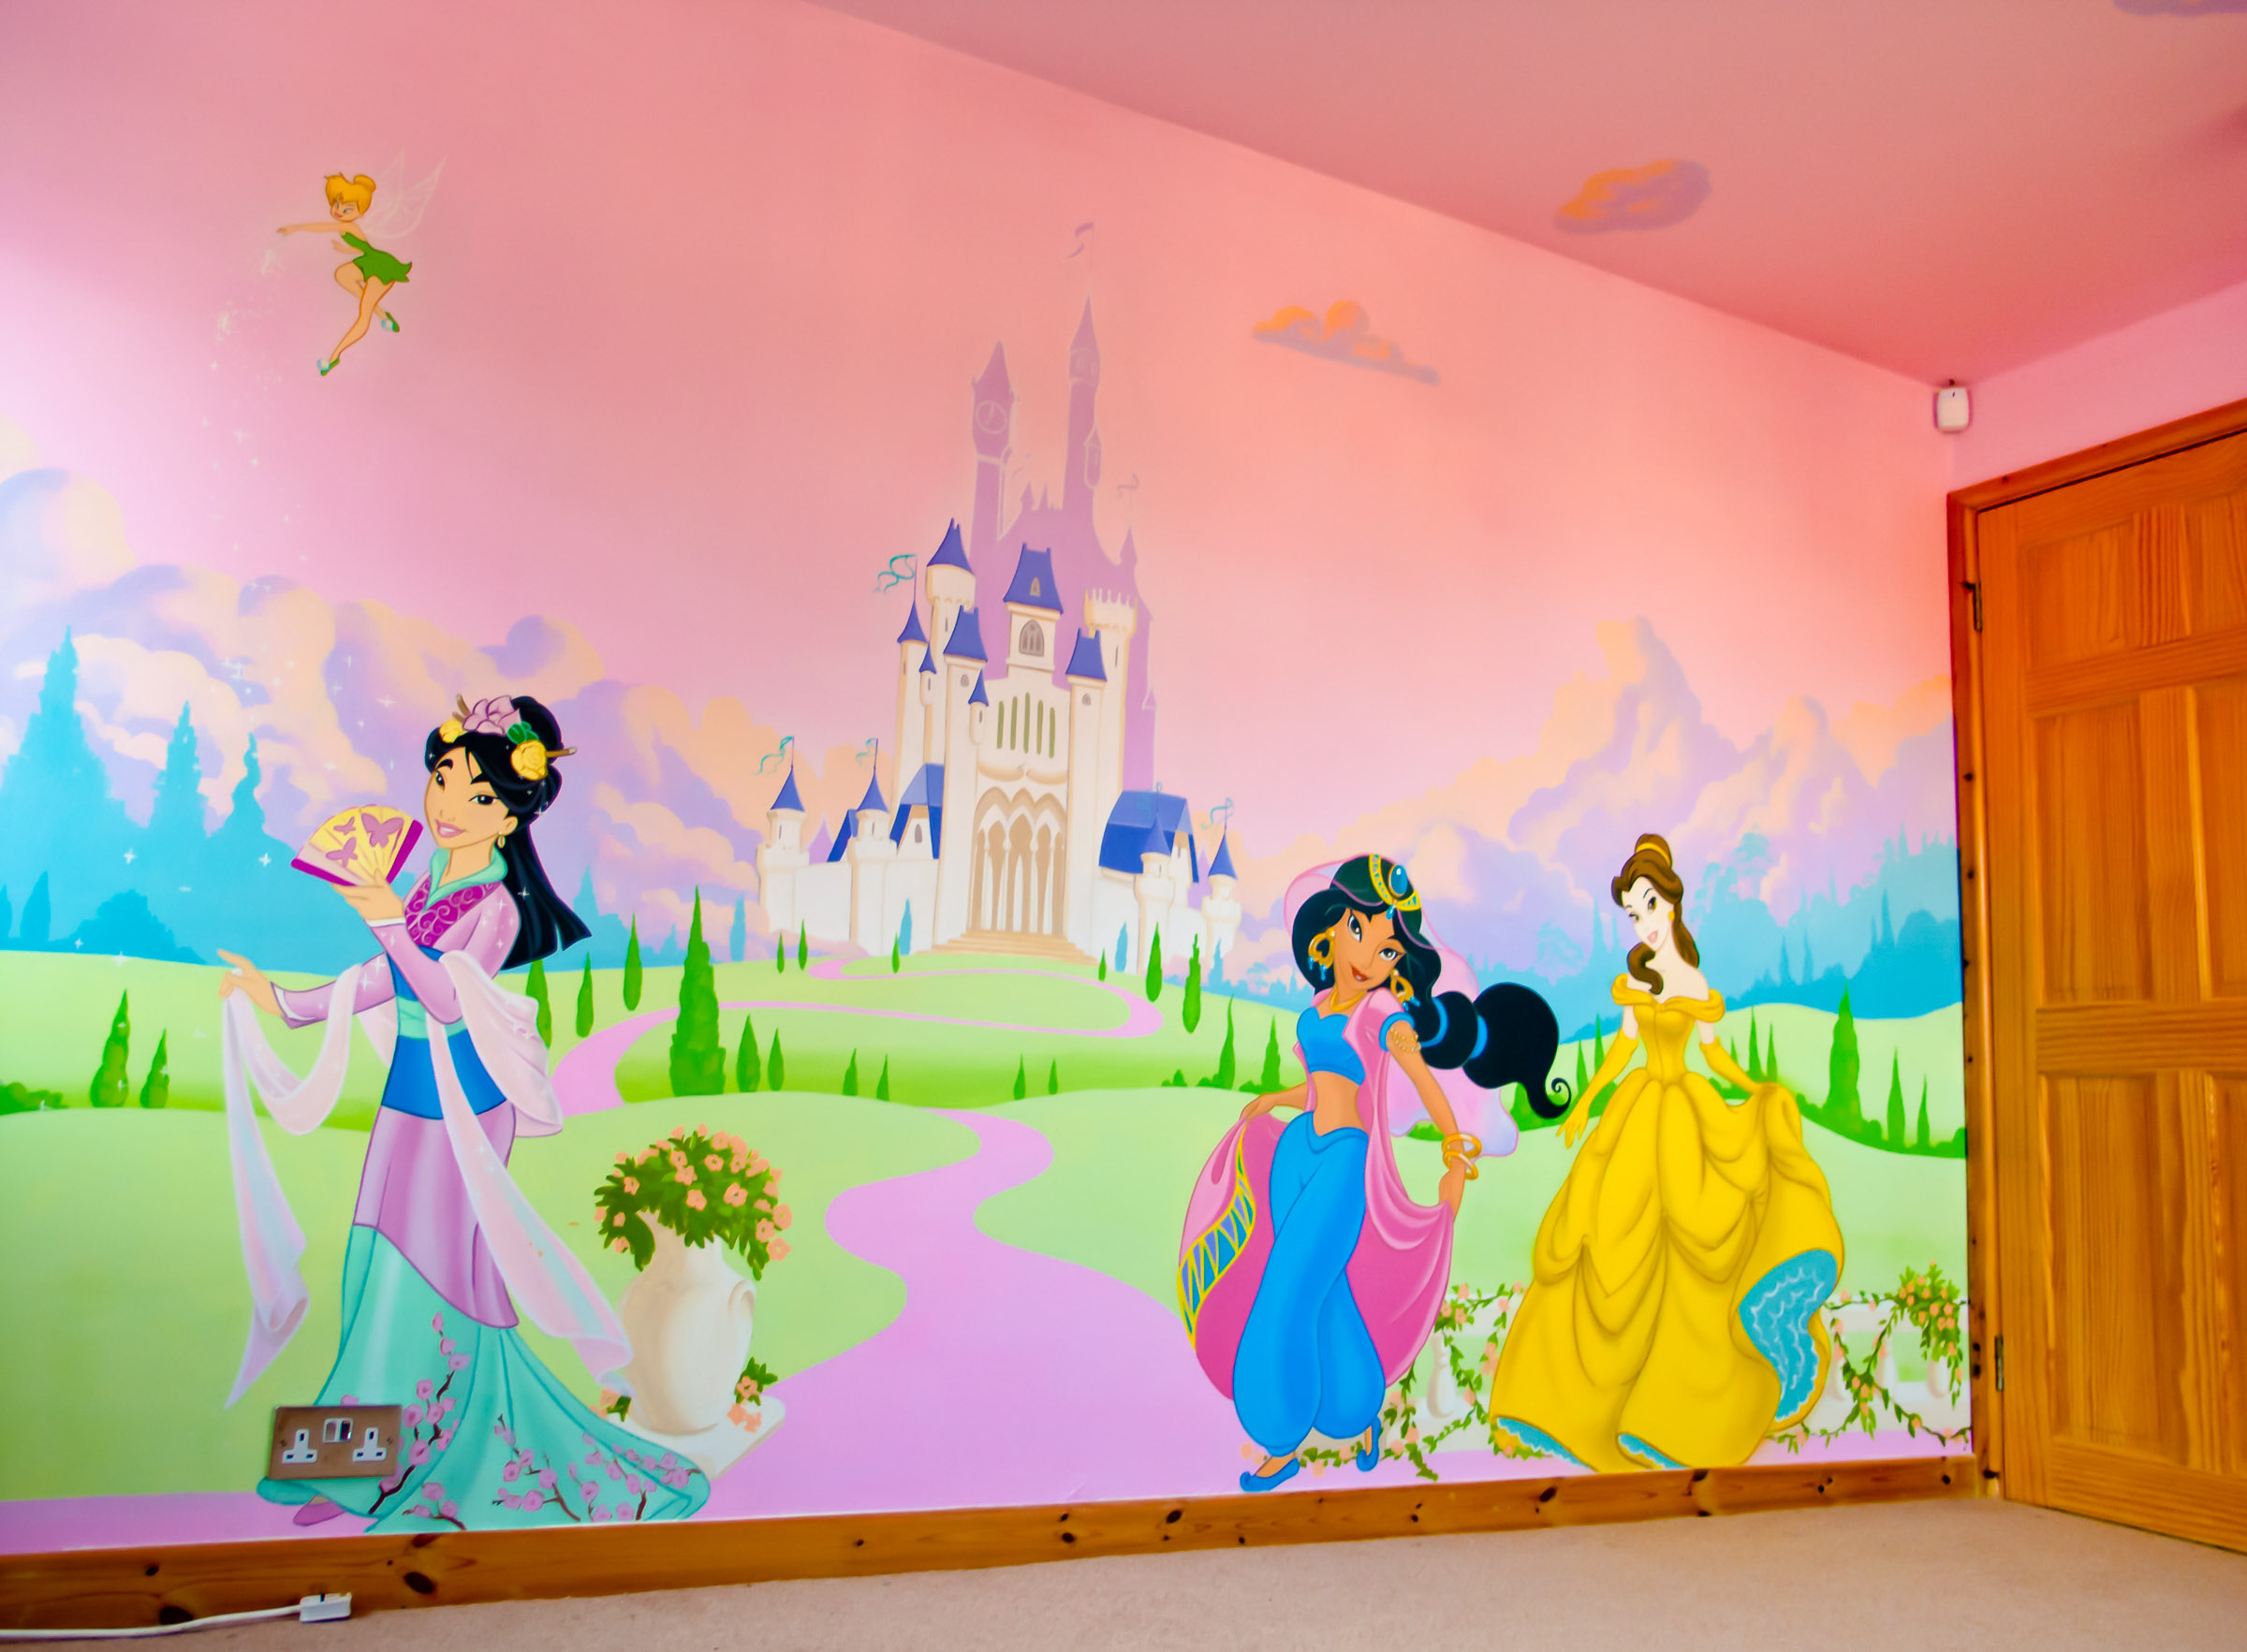 Disney Princess Mural painted by hand in little girl's bedroom